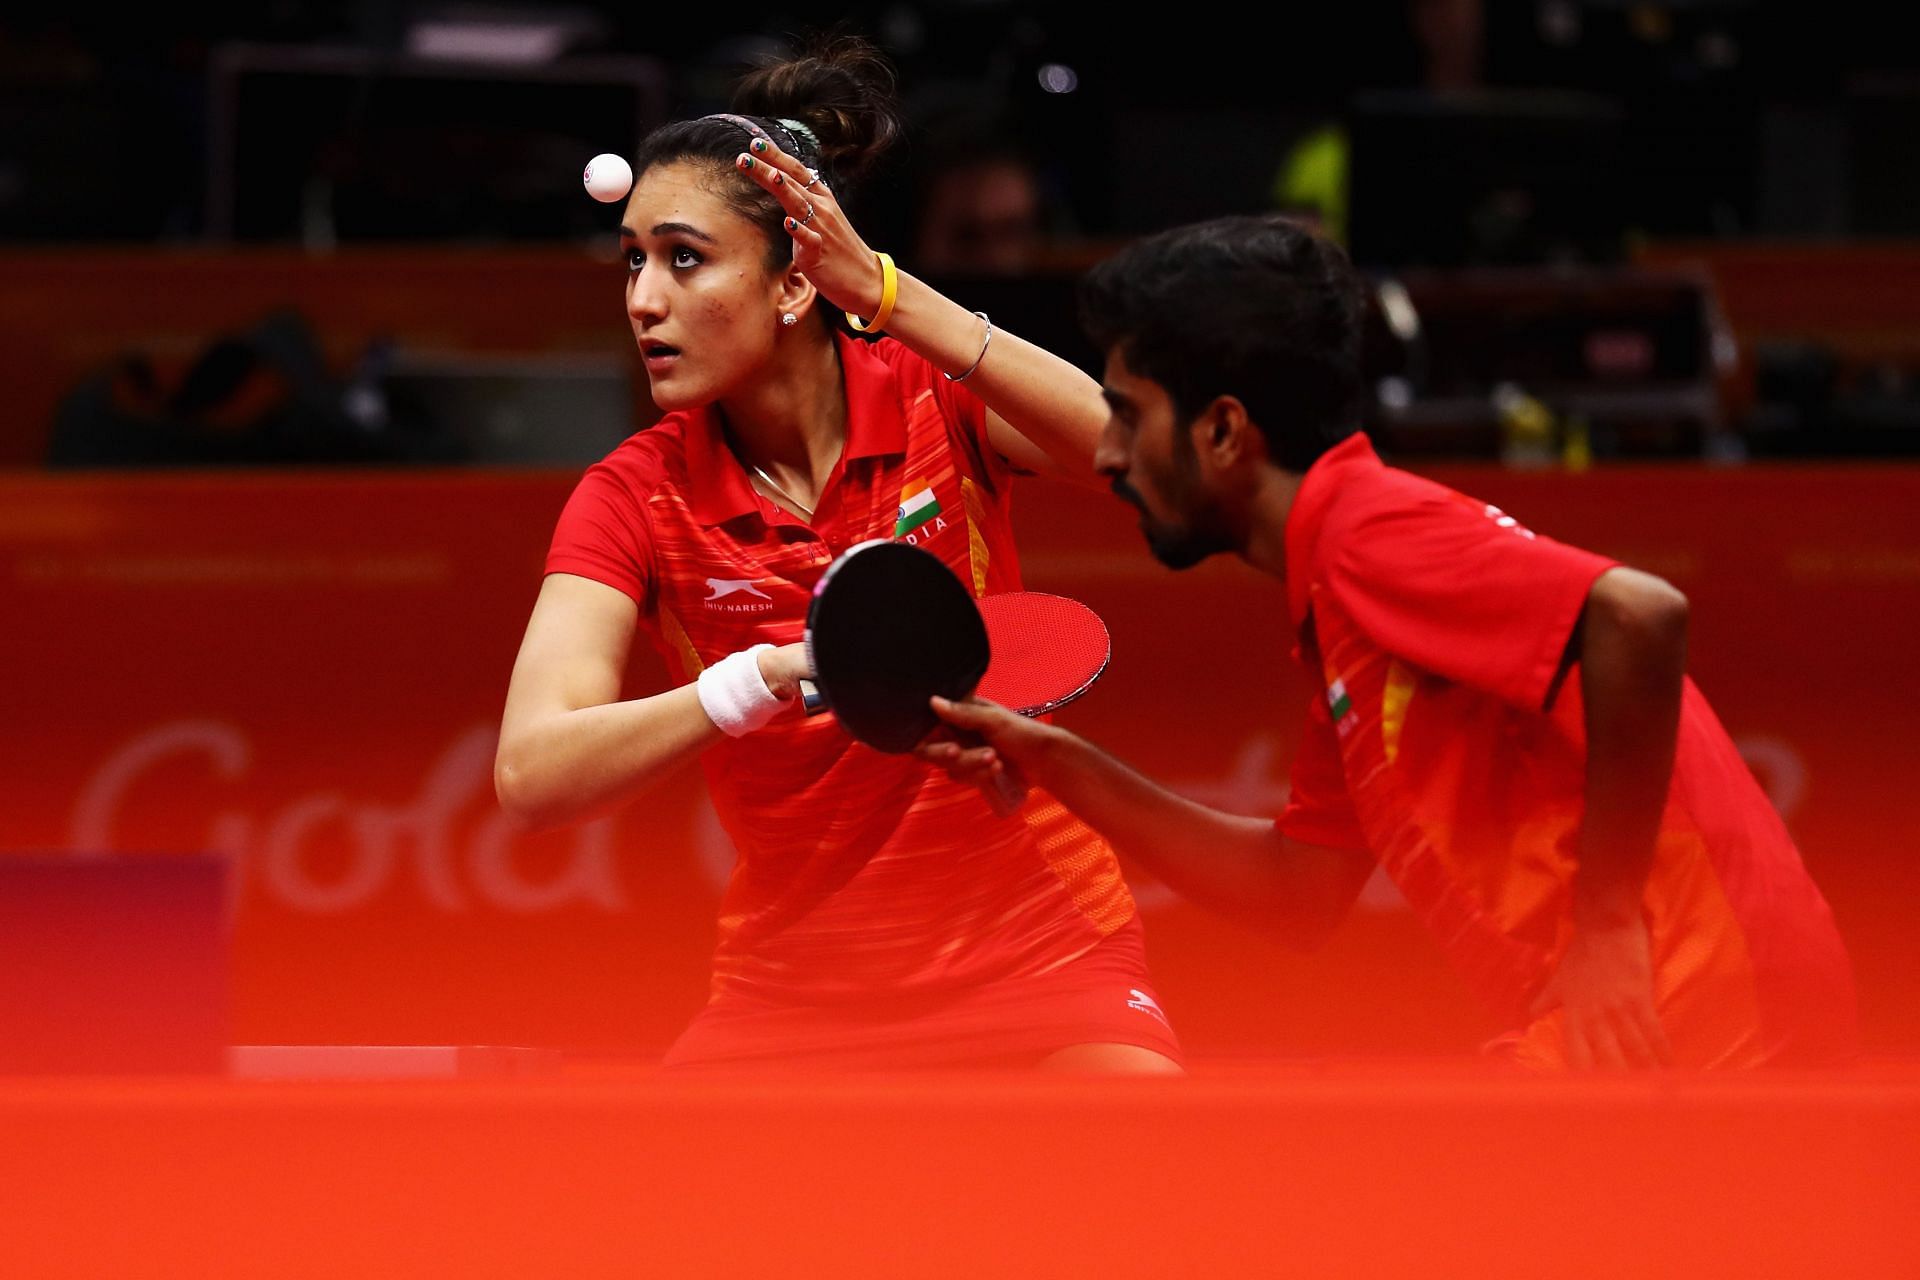 Indian paddlers G Sathiyan and Manika Batra. (PC: Getty Images)